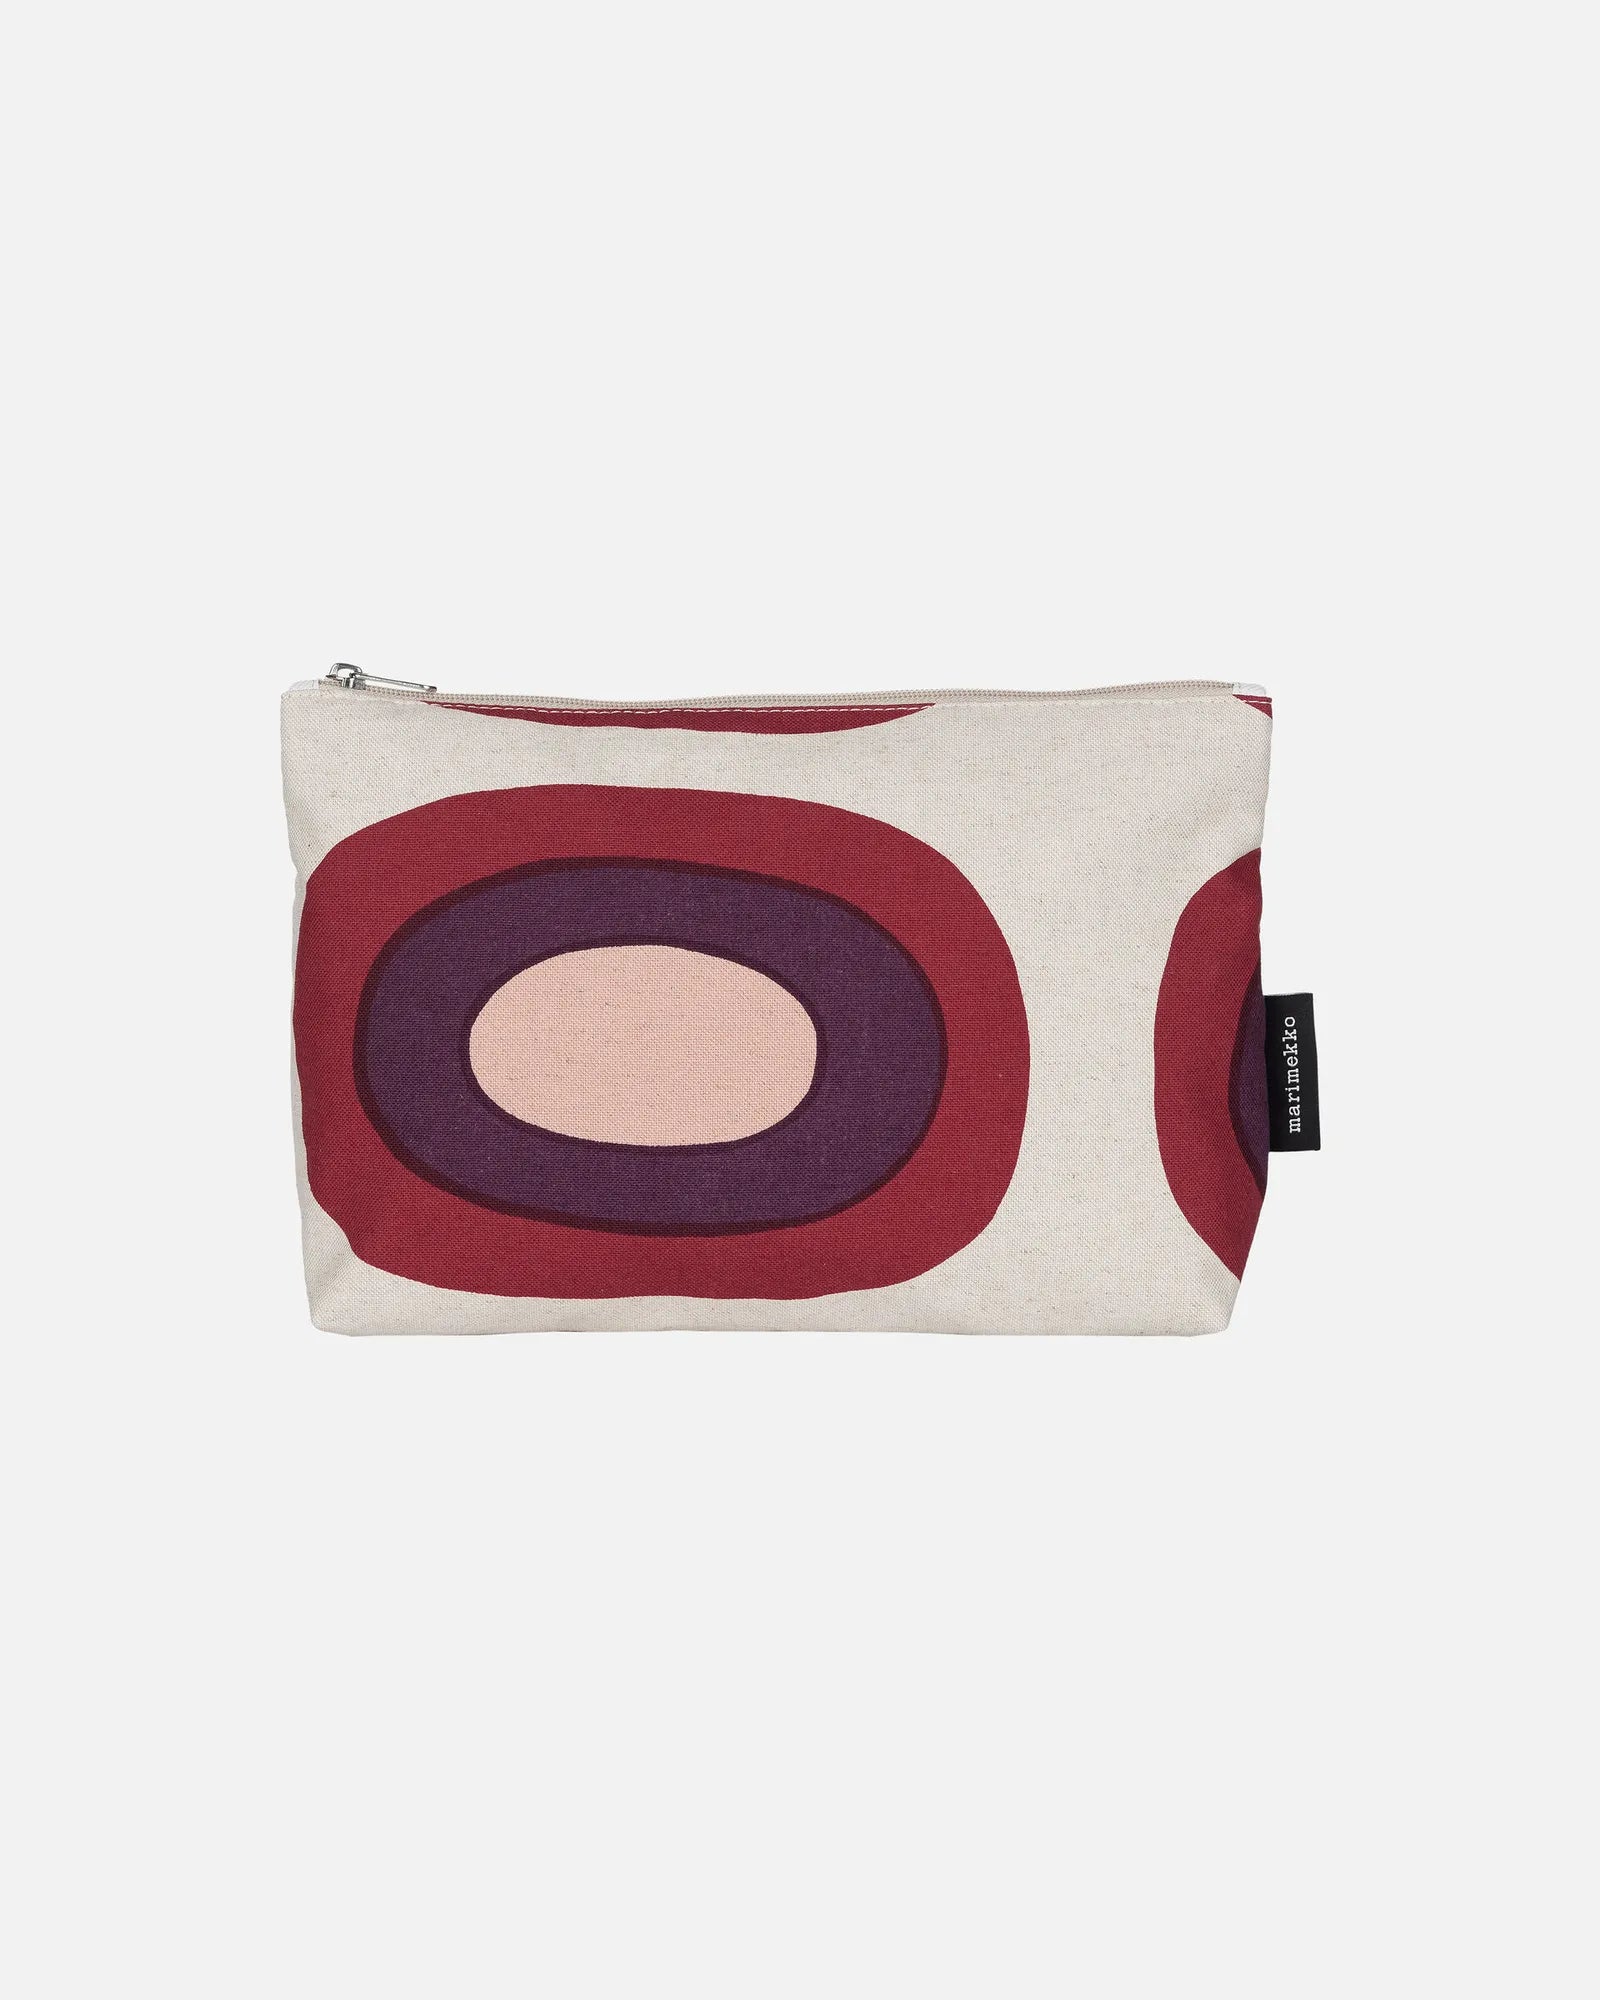 Melooni Cosmetic Bag /RELLE MELOONI  linen , red , rose 072035 930